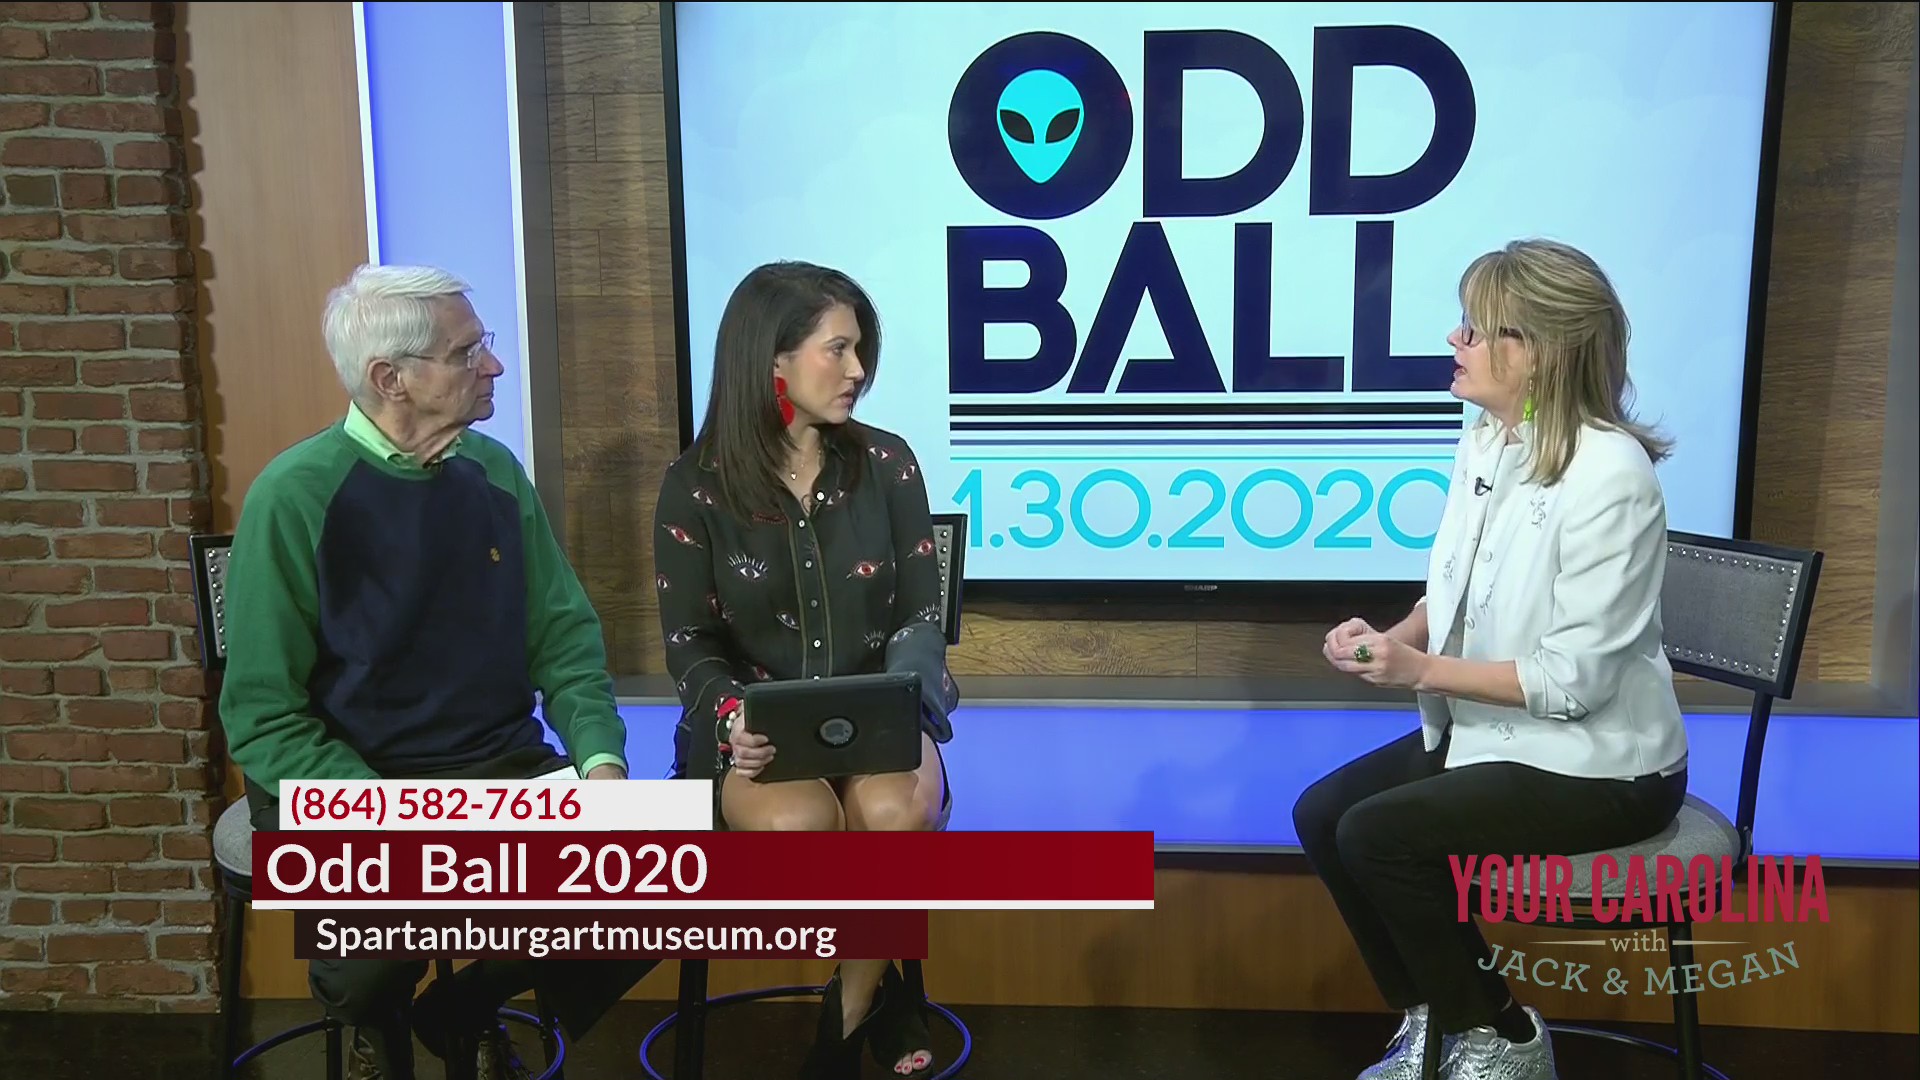 Thumbnail for the video titled "Odd Ball 2020"